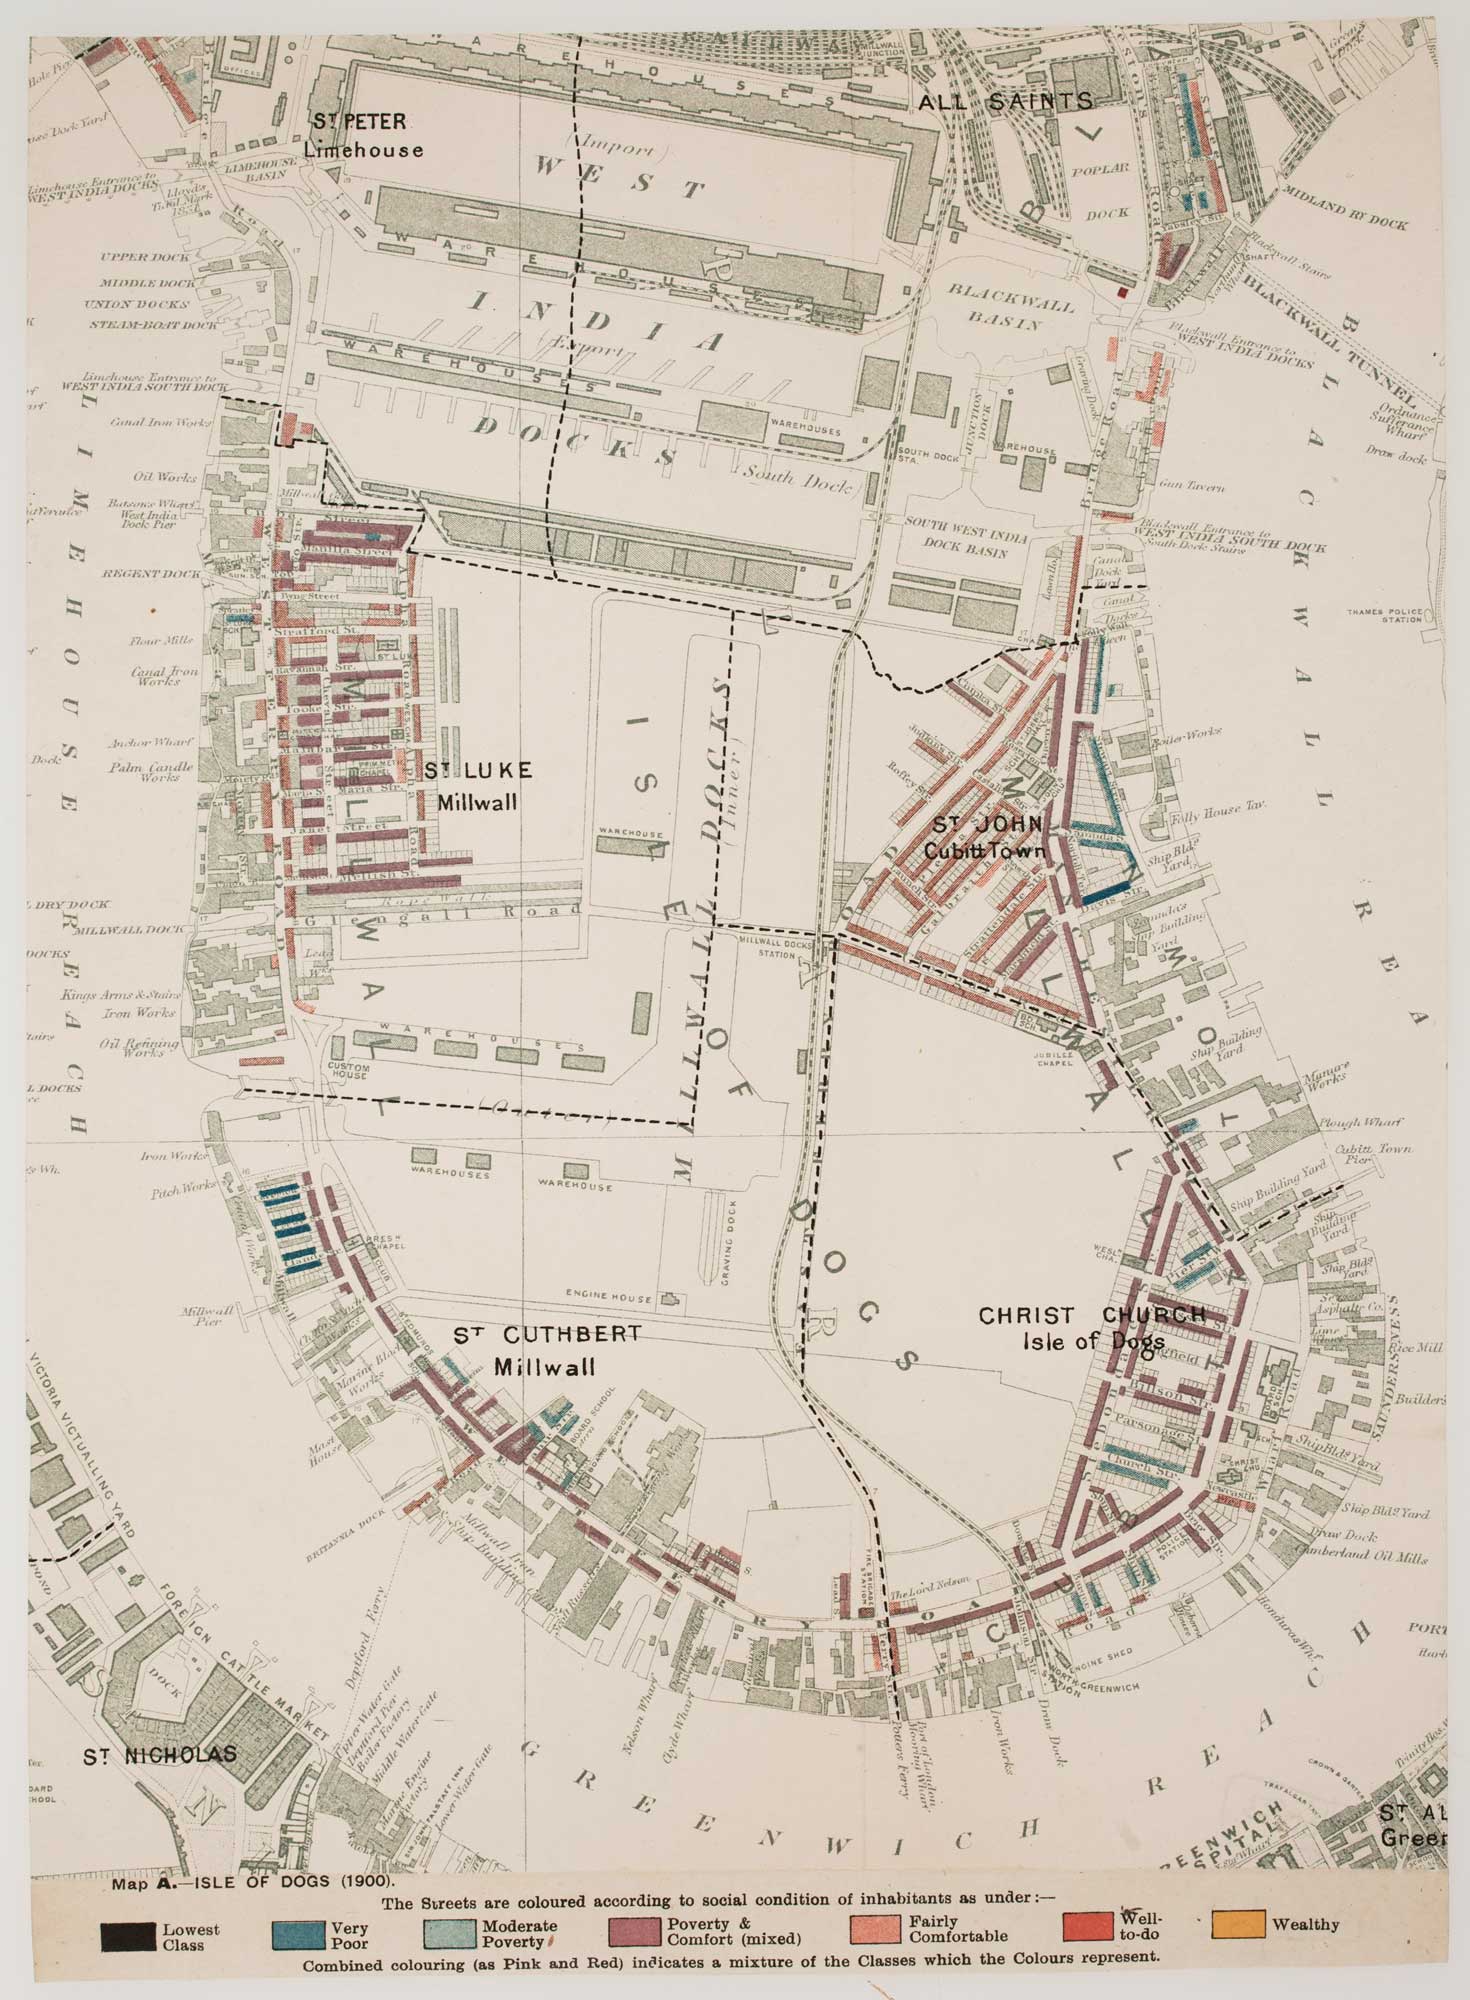 Map A of Charles Booth's Poverty Map of London, published in 1889. Source: Altea Gallery Mayfair